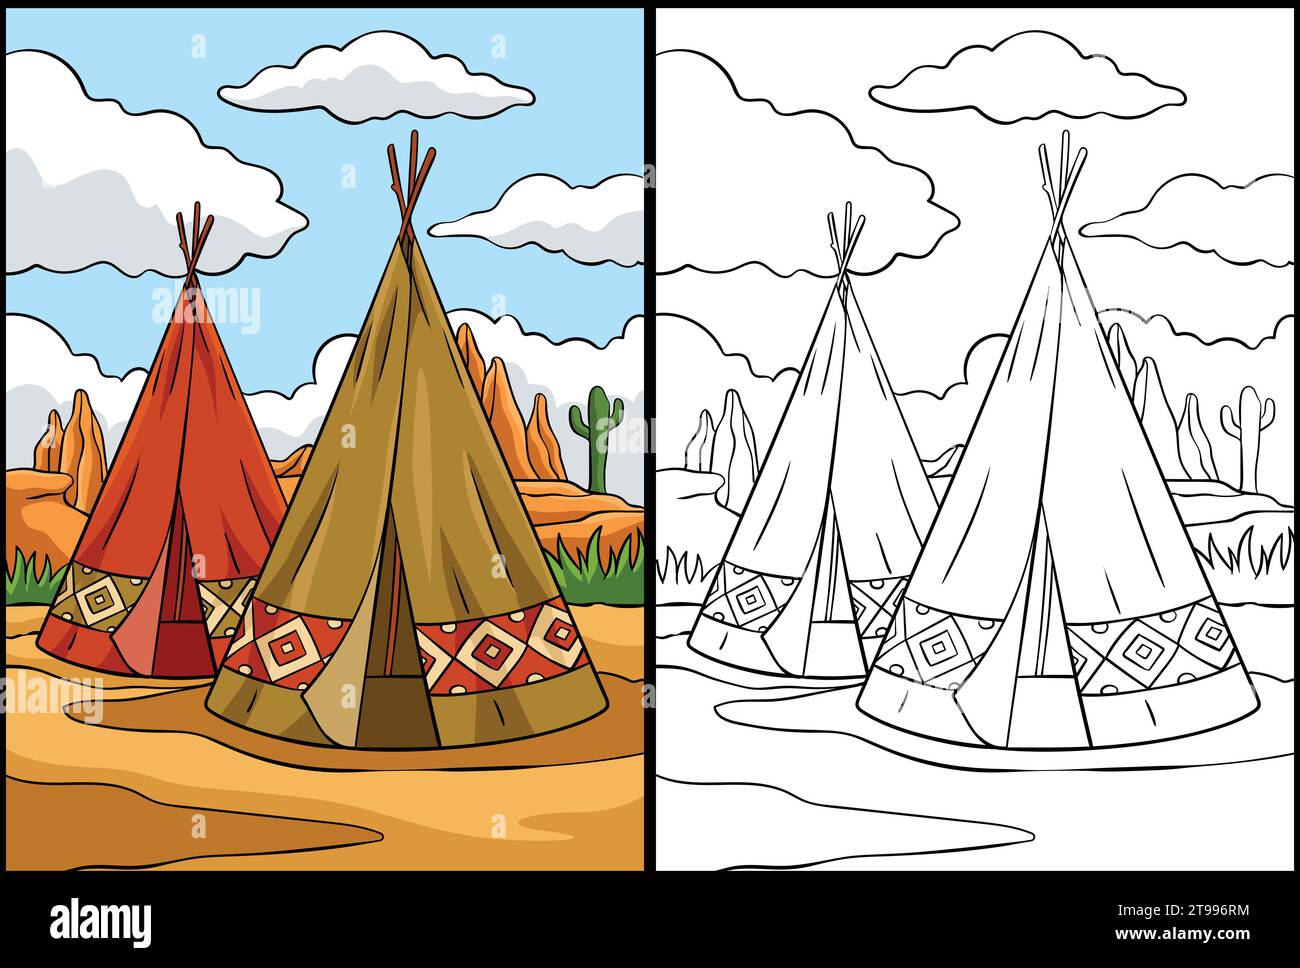 Native American Indian Tepee Coloring Illustration Stock Vector